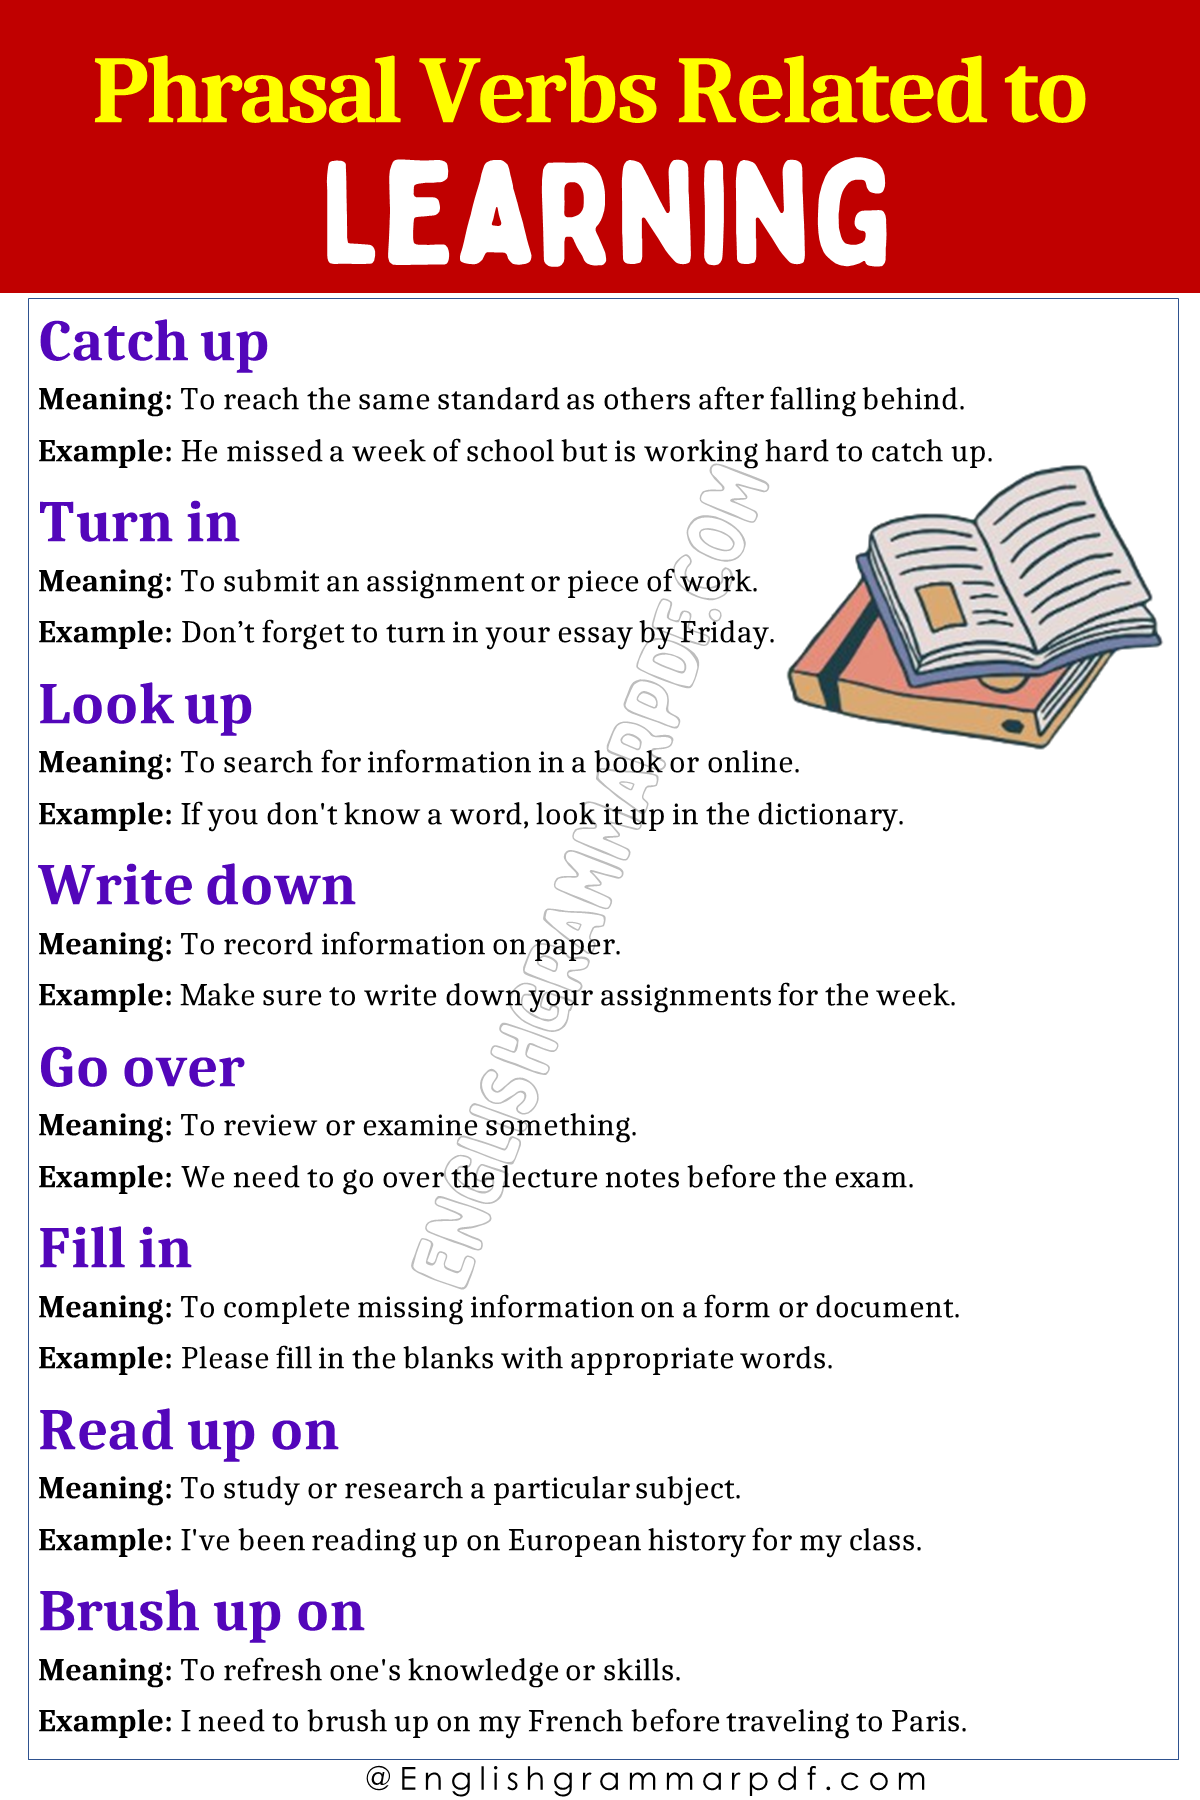 Phrasal Verbs Related To Learning